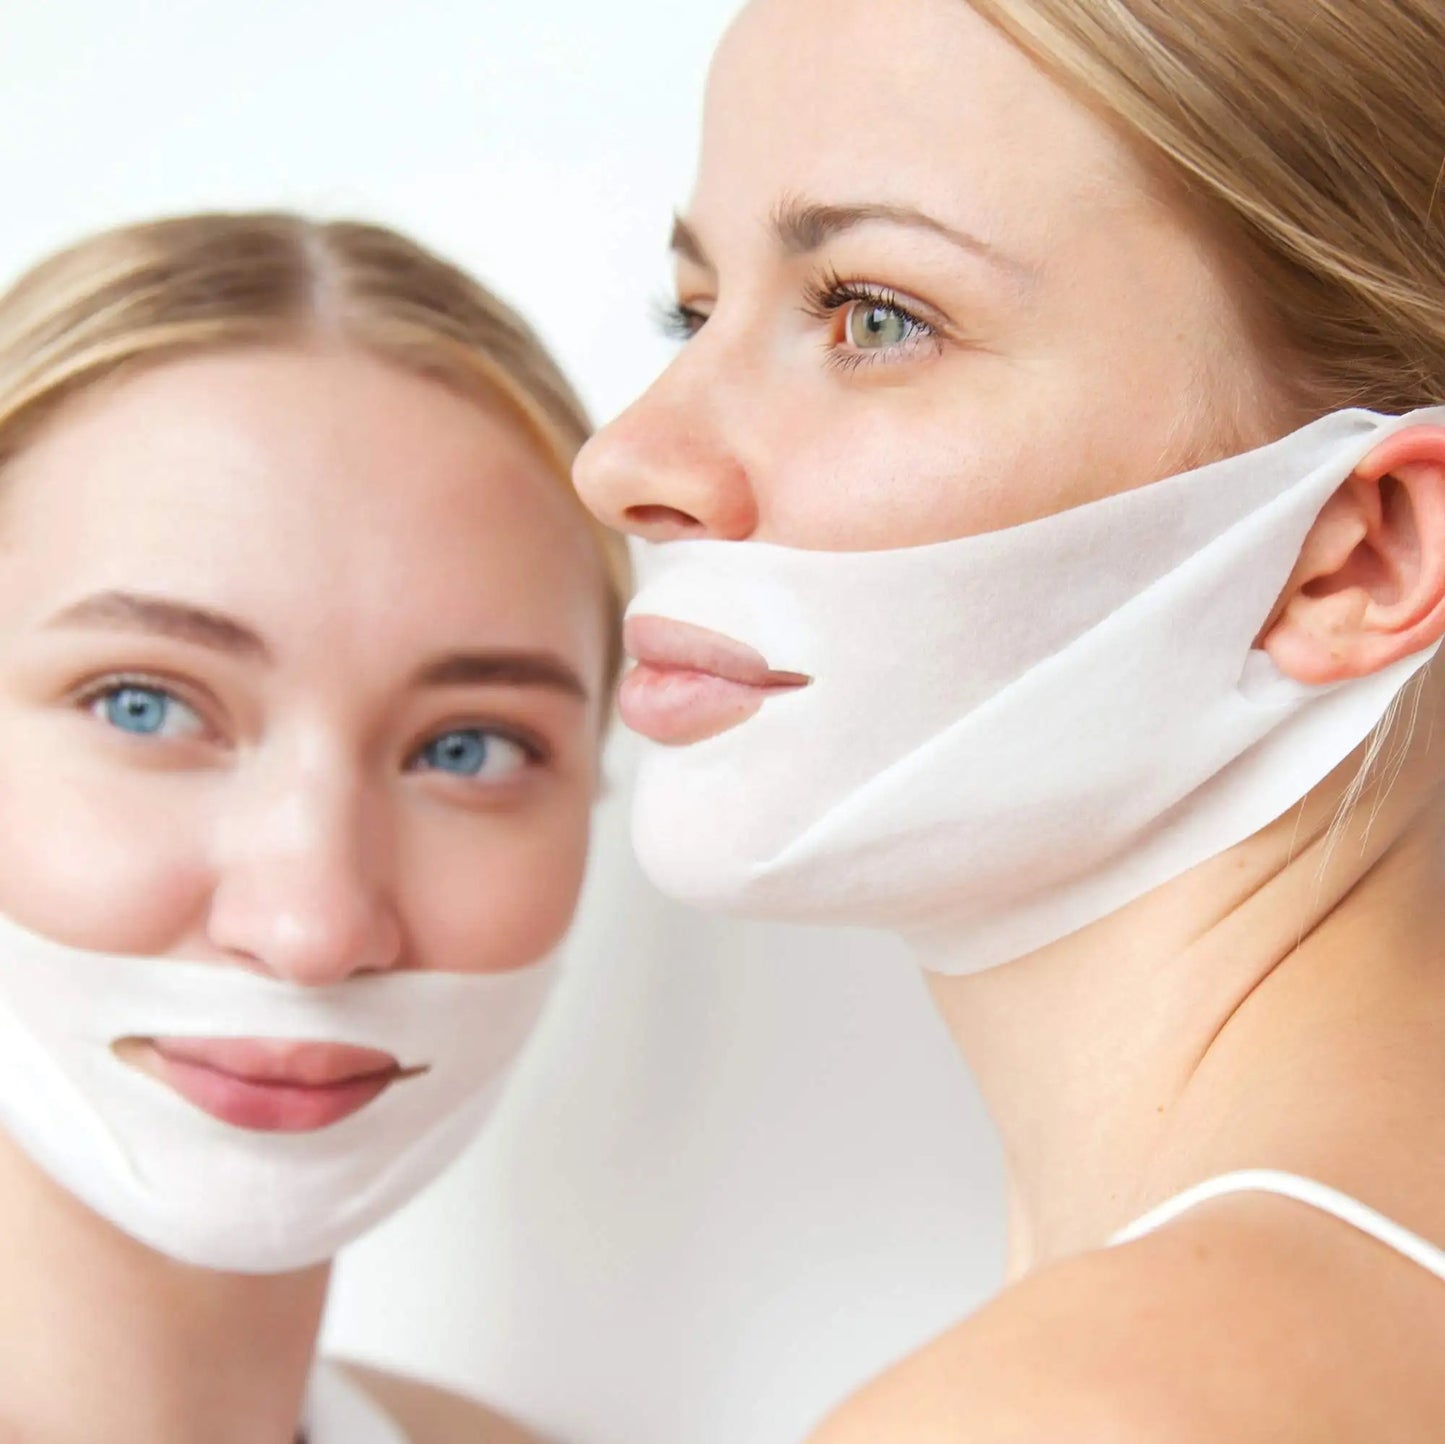 Jaw Defining Face Lift Mask